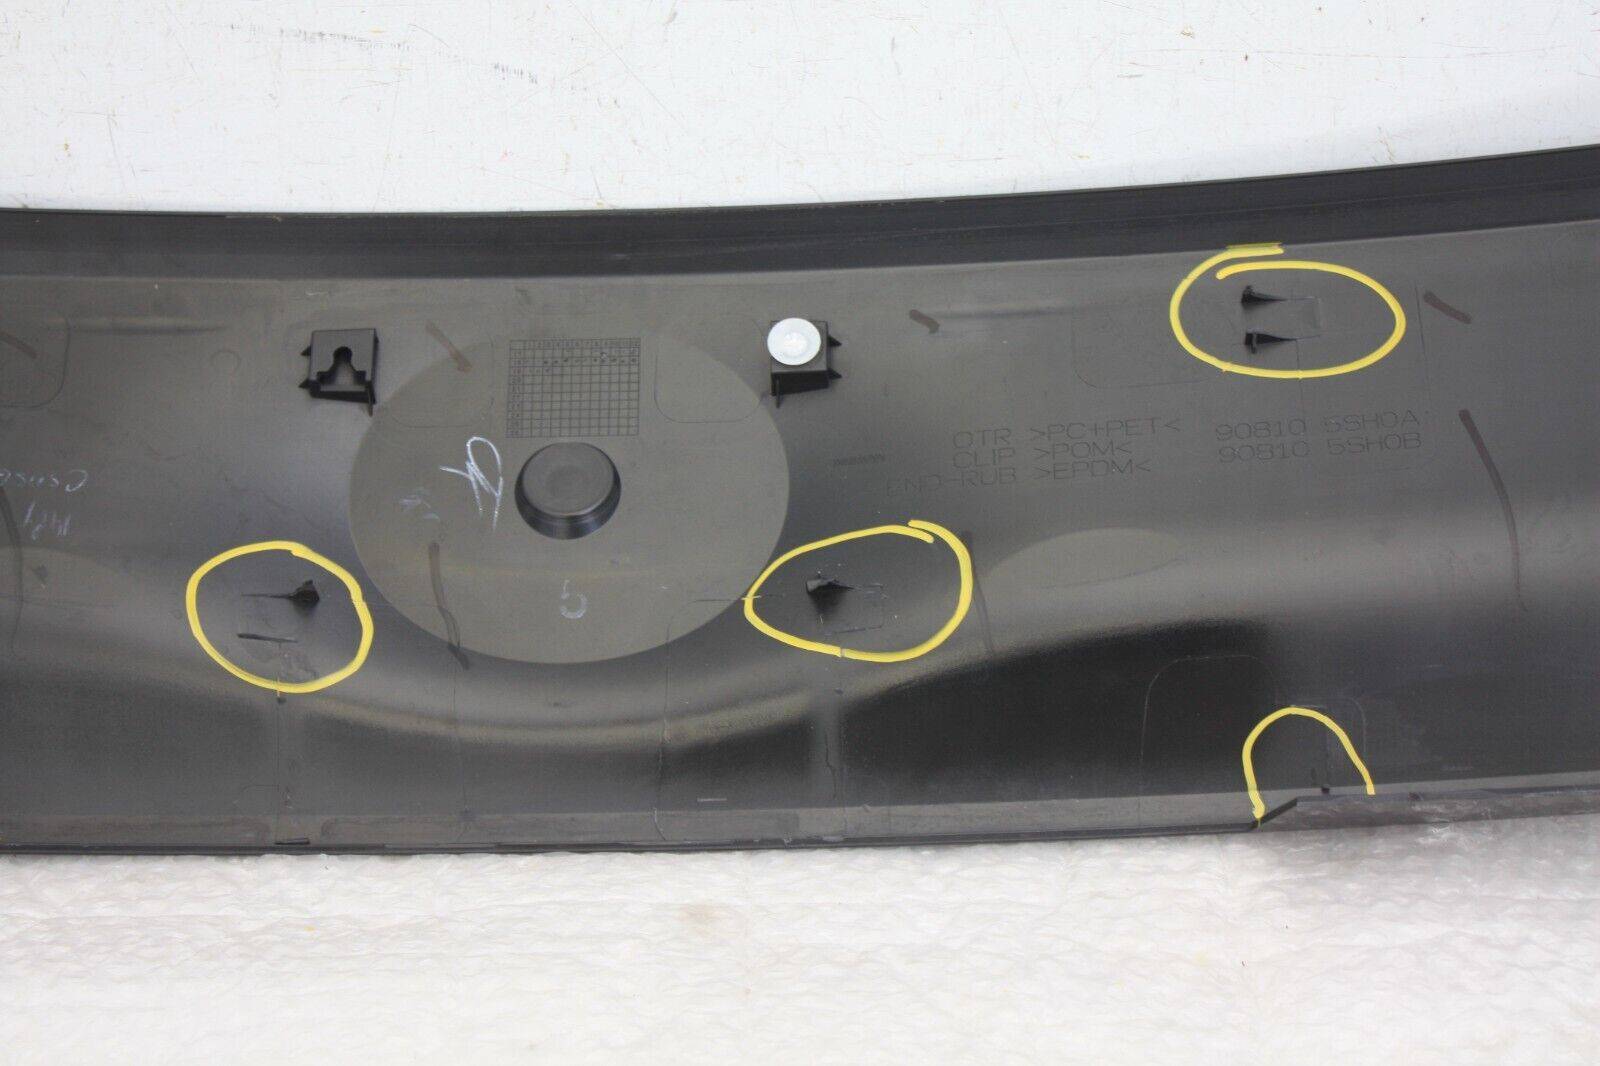 Nissan-Leaf-Rear-Tailgate-Trunk-Lid-Panel-Cover-Trim-90810-5SH0A-FIXING-DAMAGED-176365212247-12